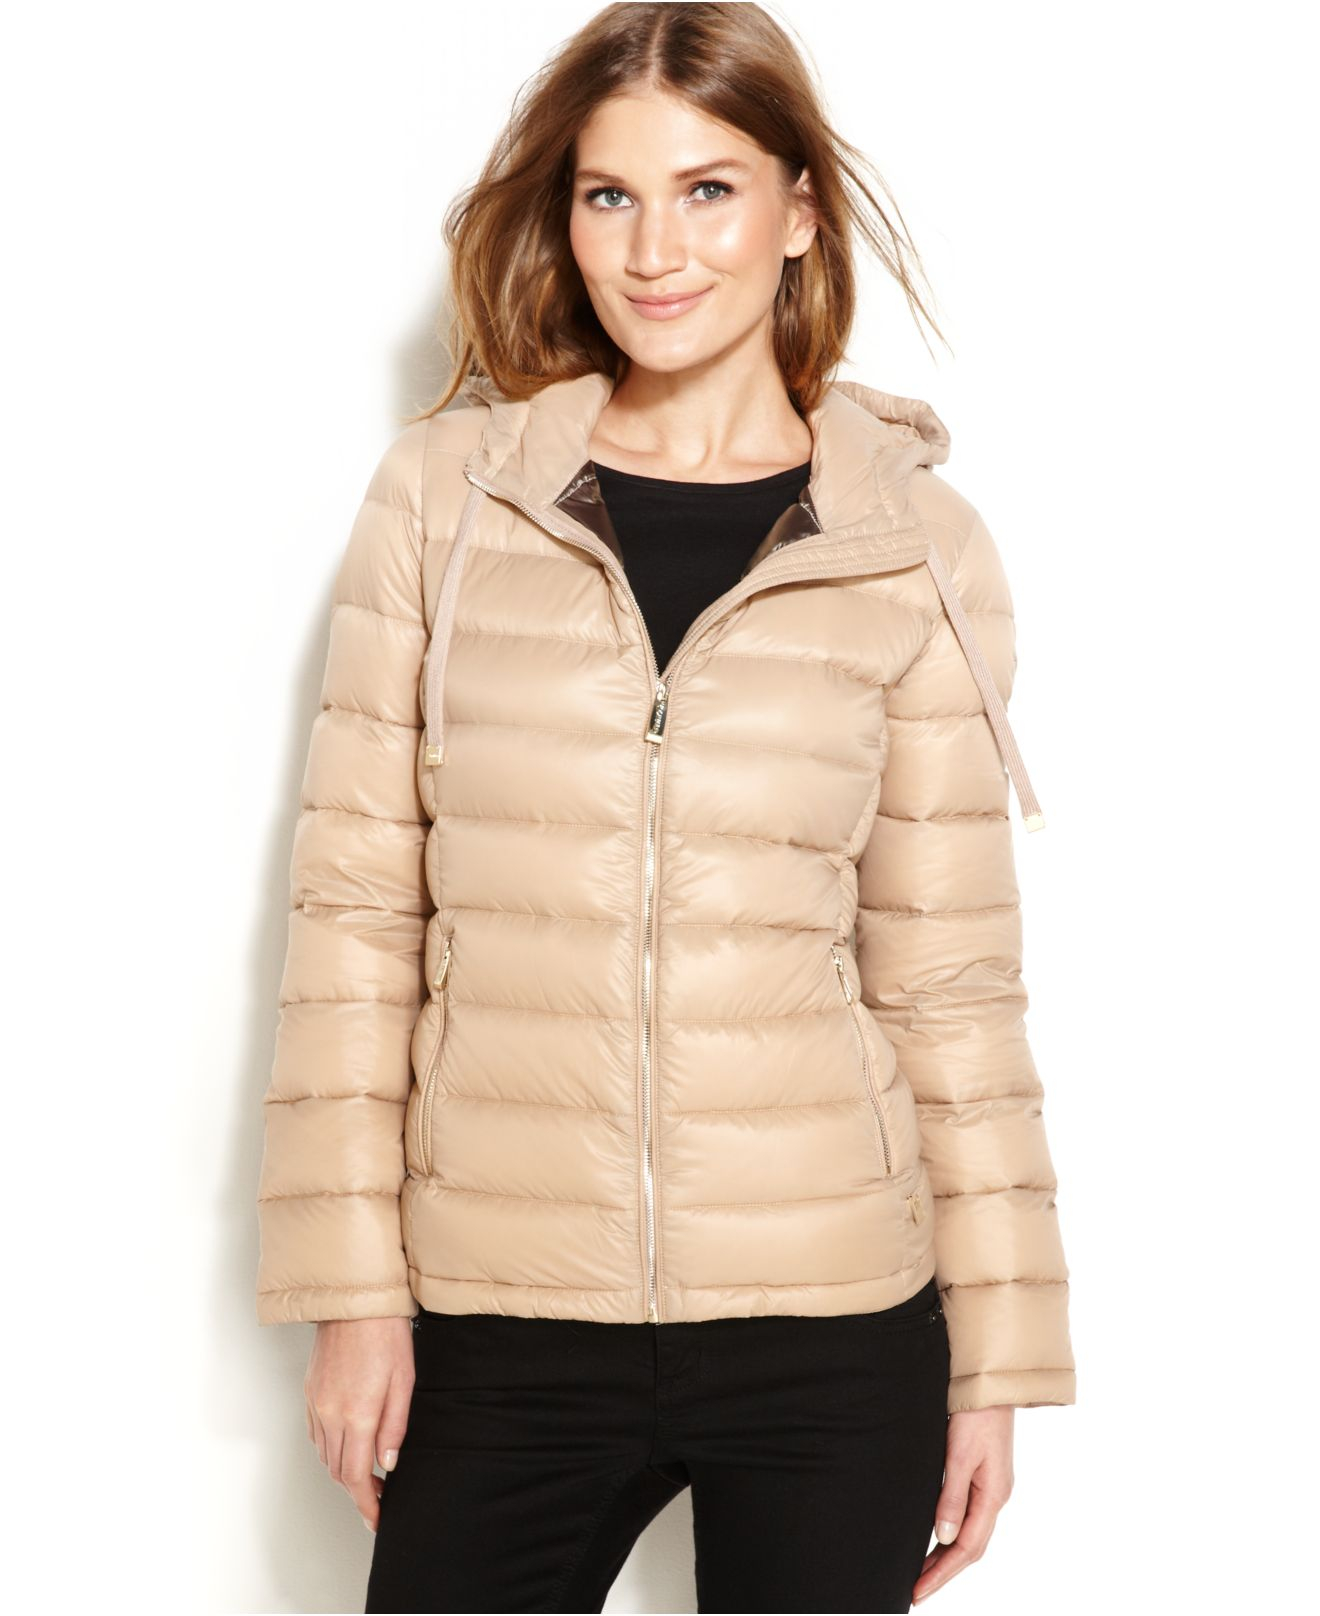 Lyst - Calvin klein Hooded Quilted Packable Down Puffer Coat in Natural